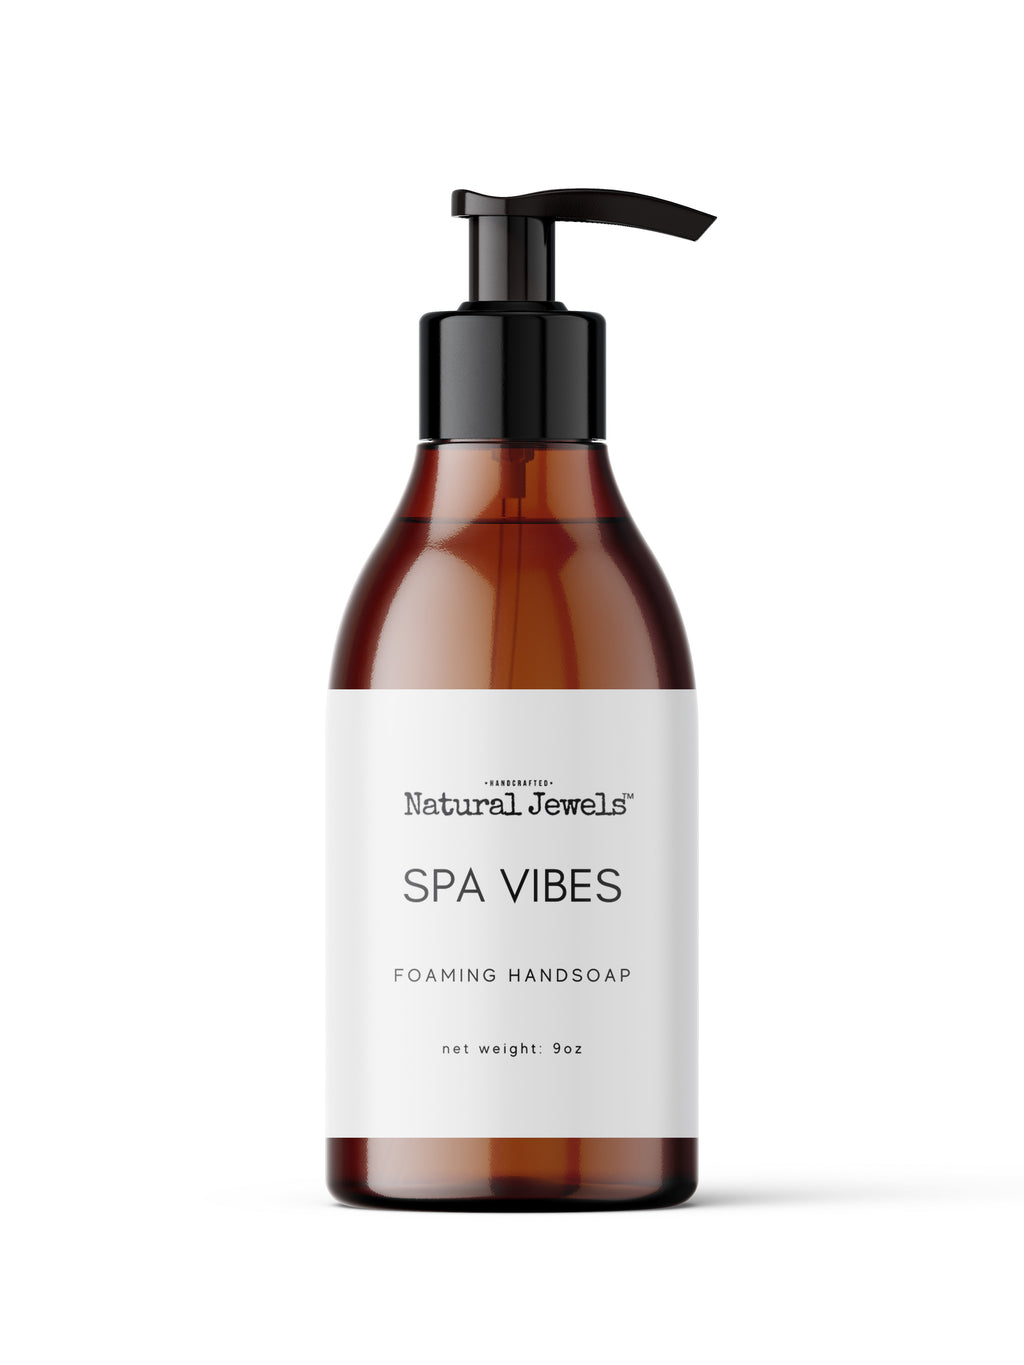 Spa Vibes Foaming Hand Soap